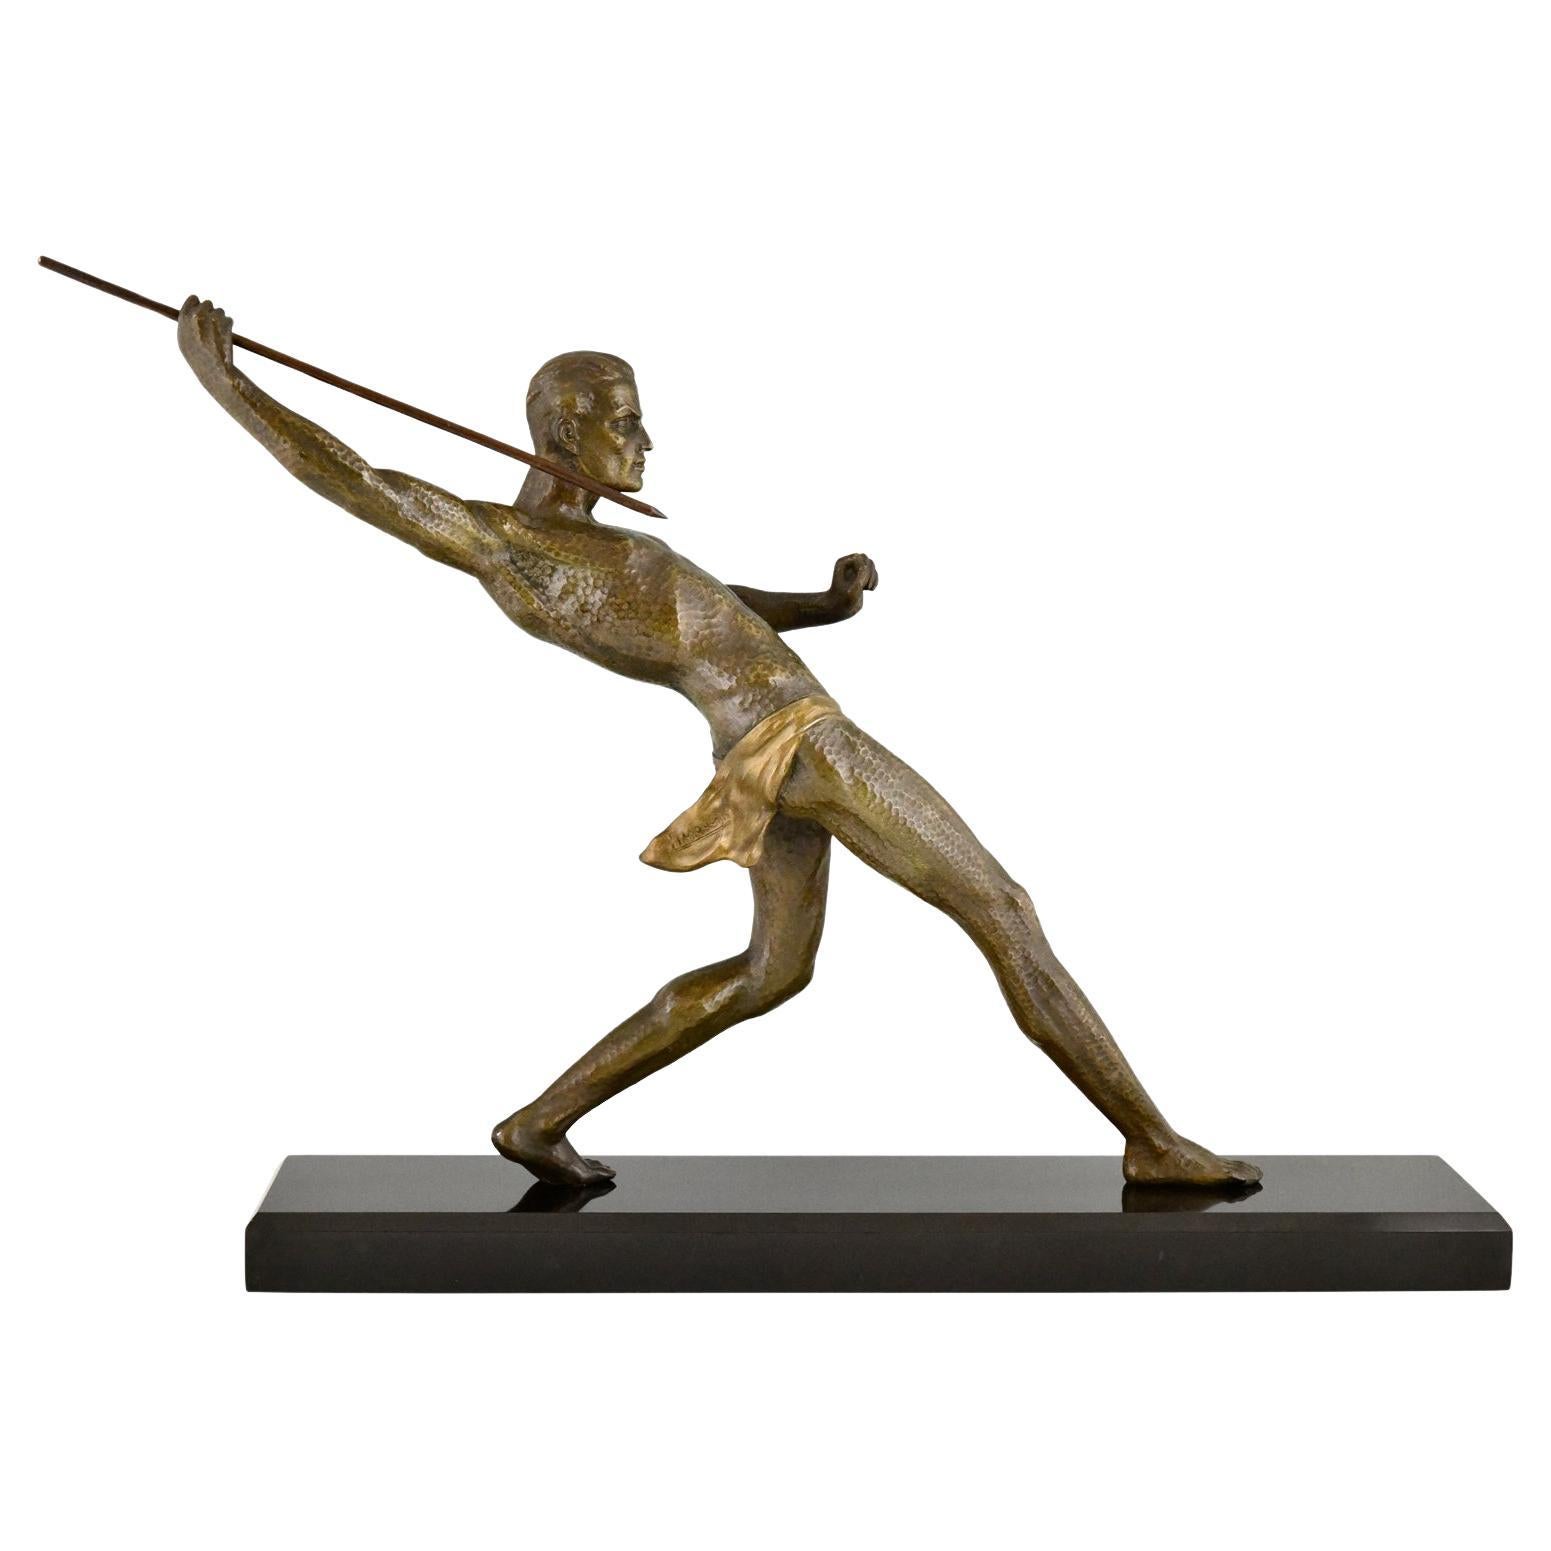 Art Deco sculpture athlete with spear javelin thrower signed by Limousin, 1930. For Sale